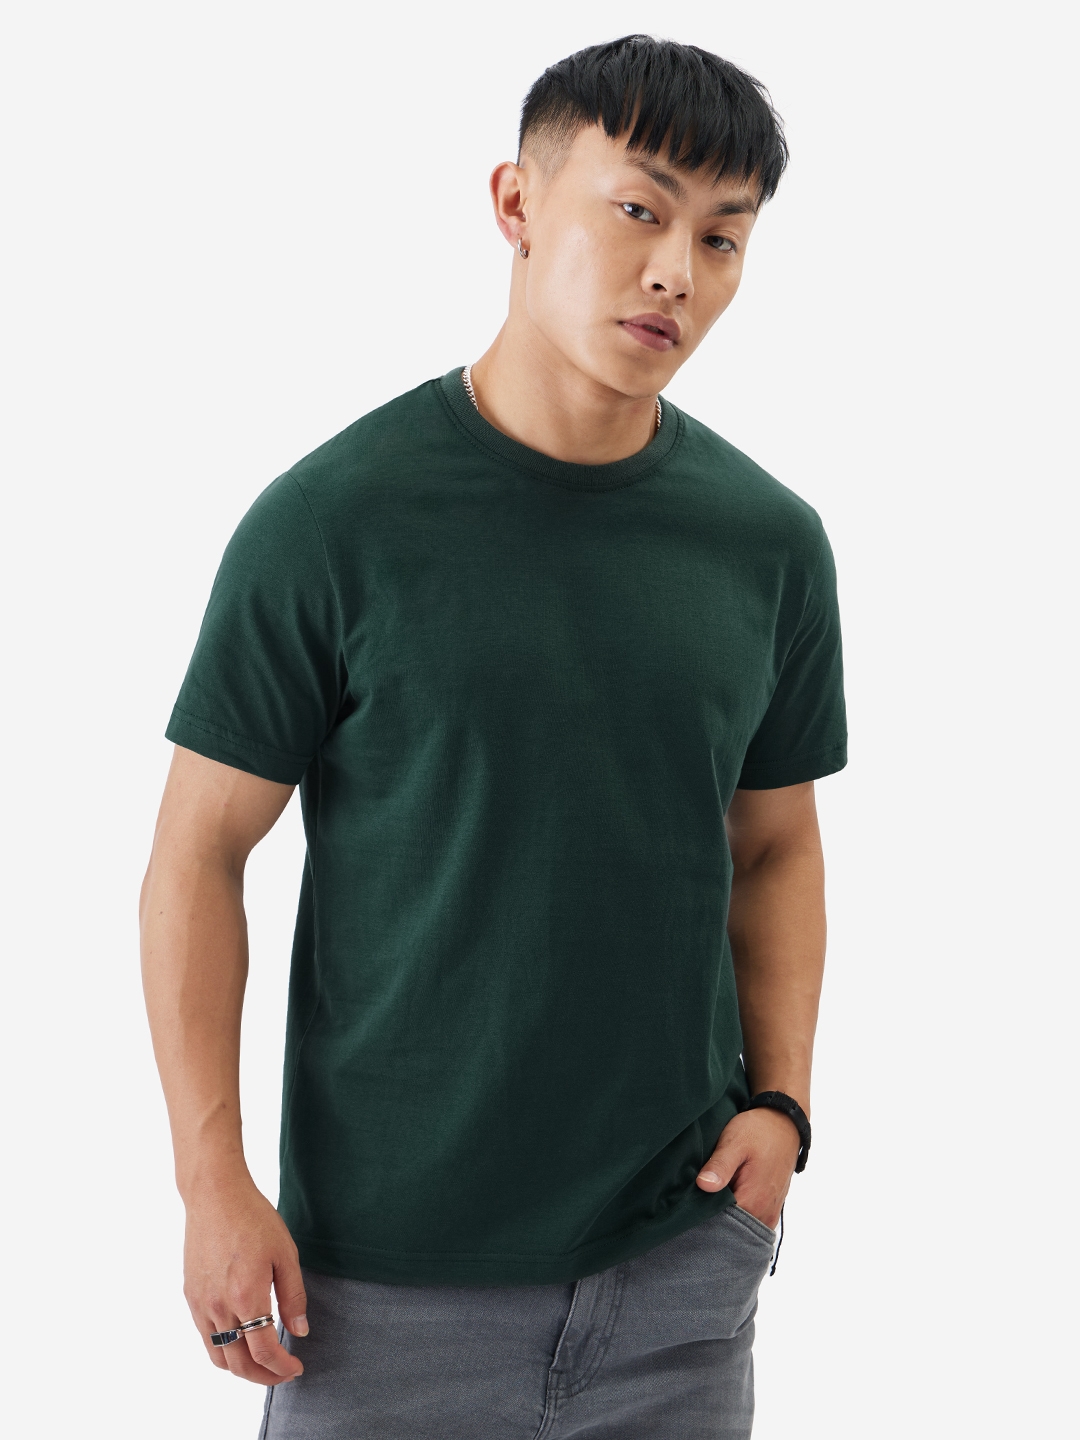 The Souled Store | Men's Solids: Emerald Green T-Shirt